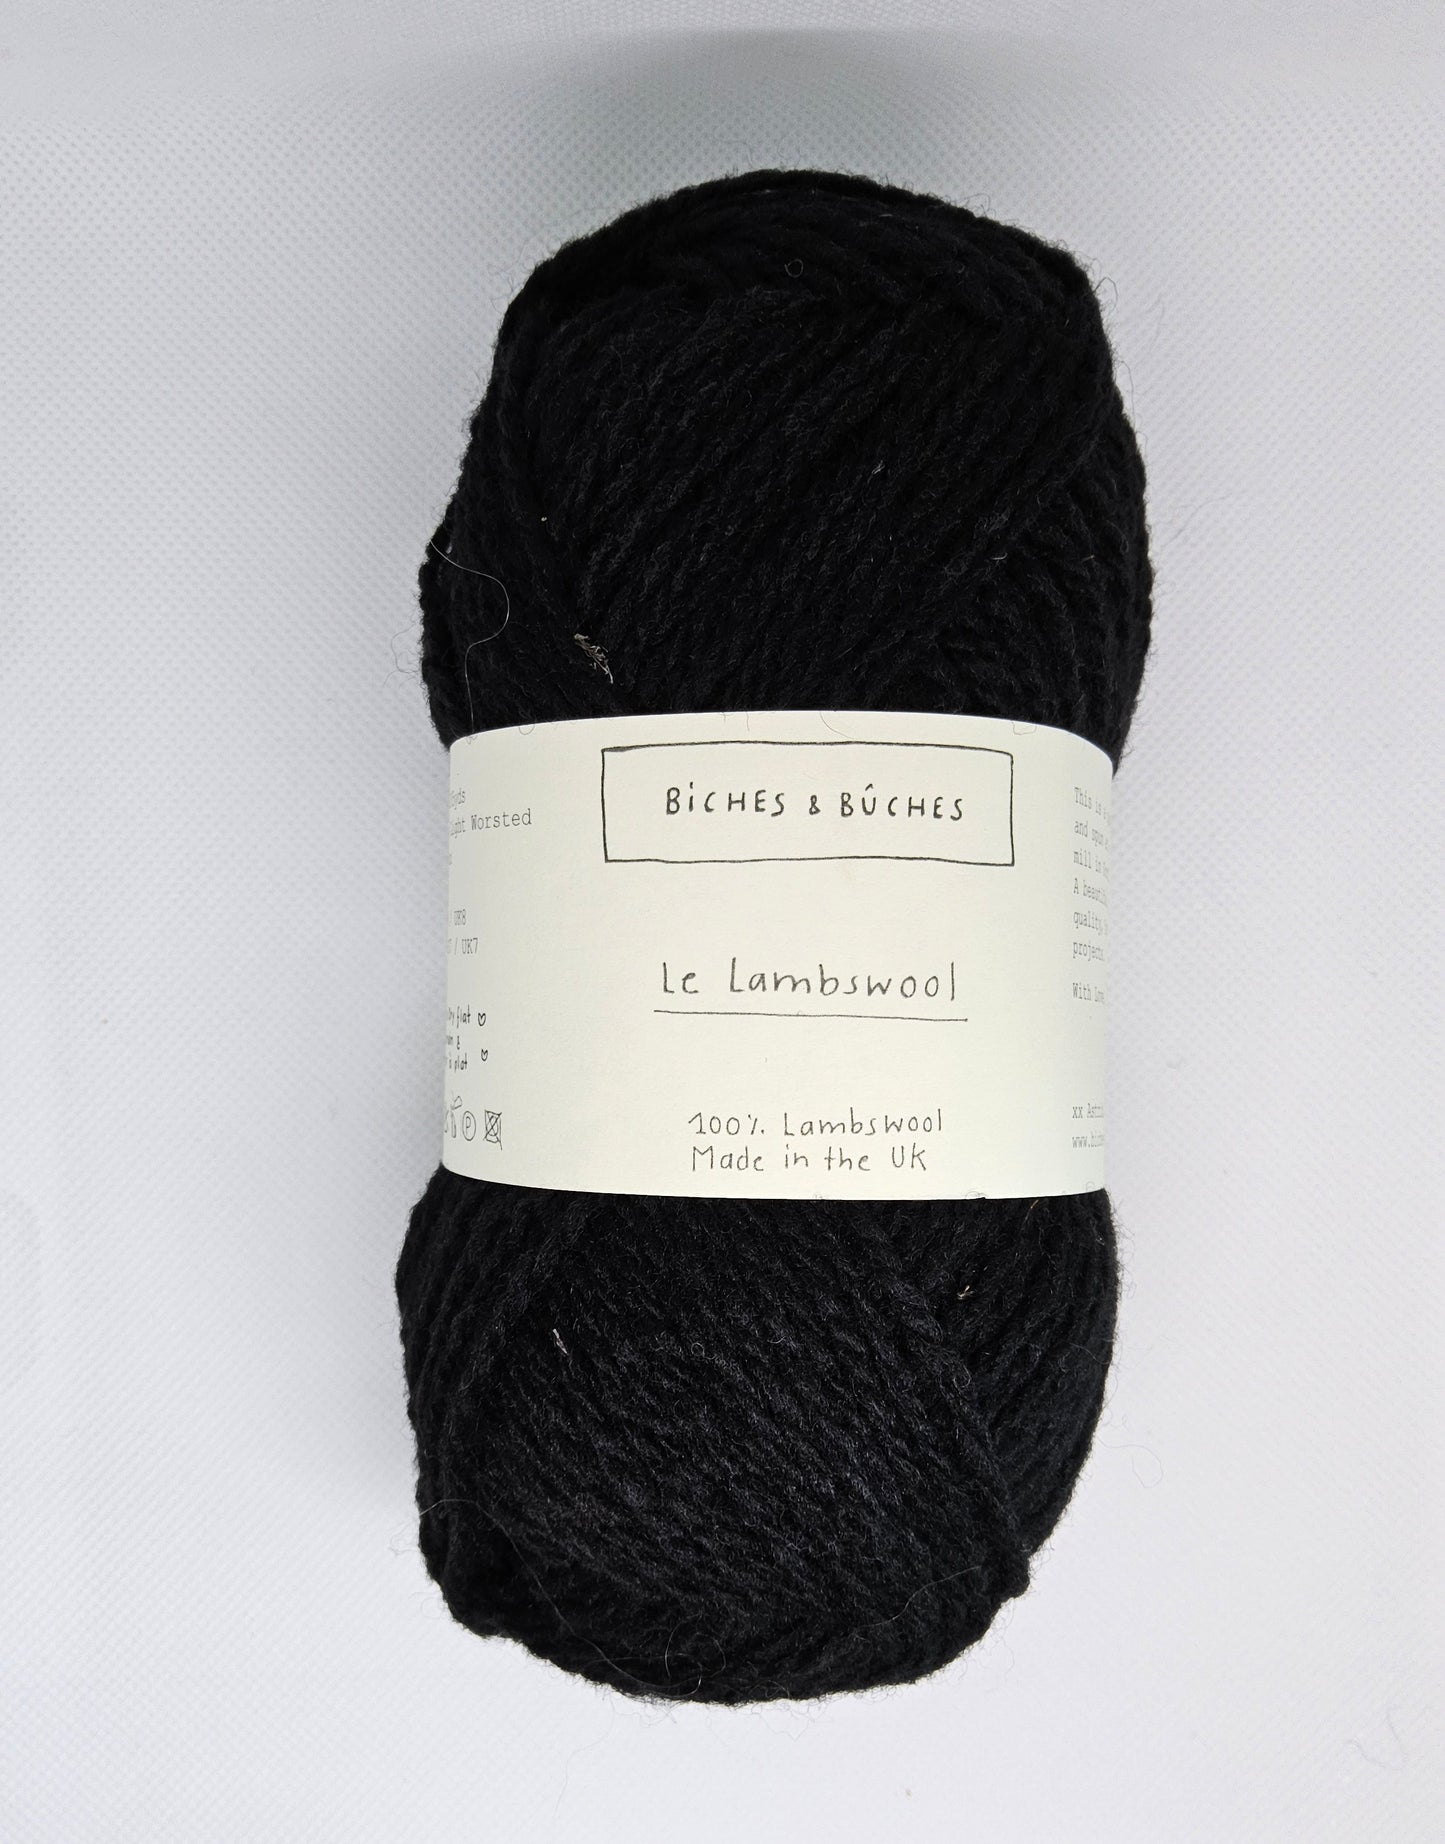 Le Lambswool